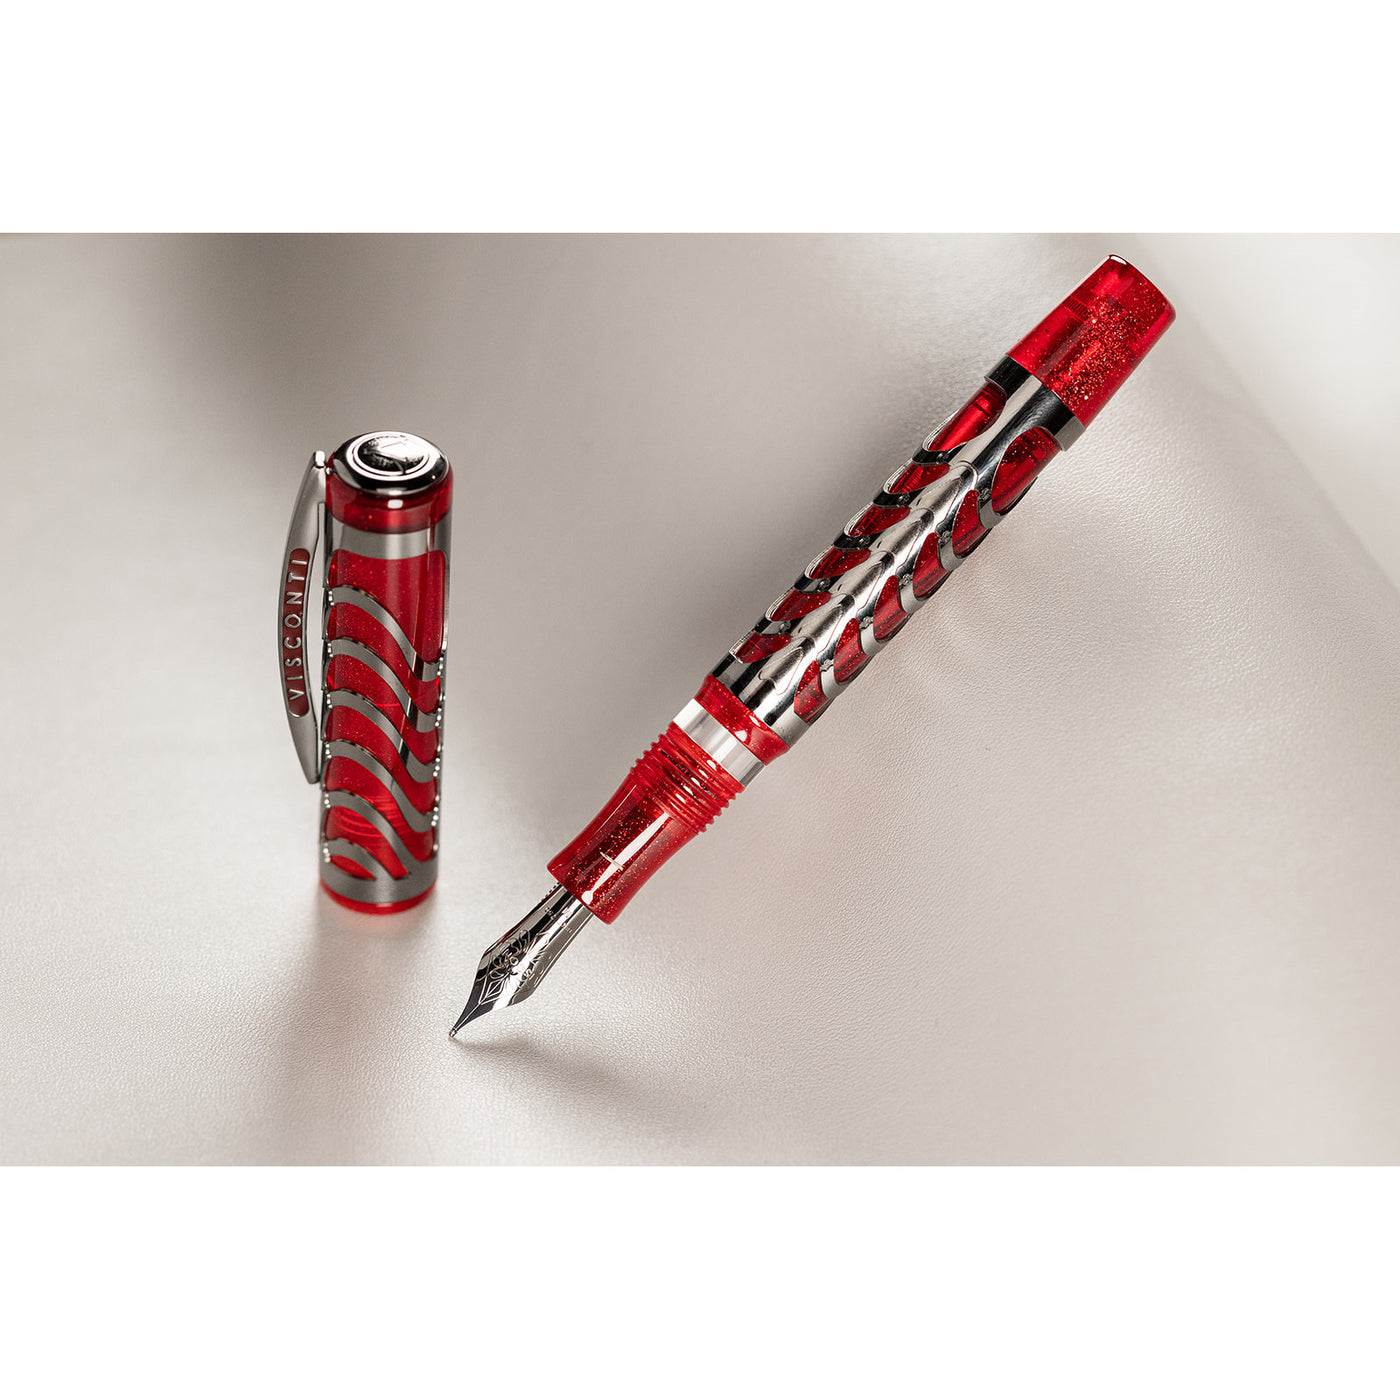 Visconti Skeleton Fountain Pen - Ruby Red (Limited Edition)